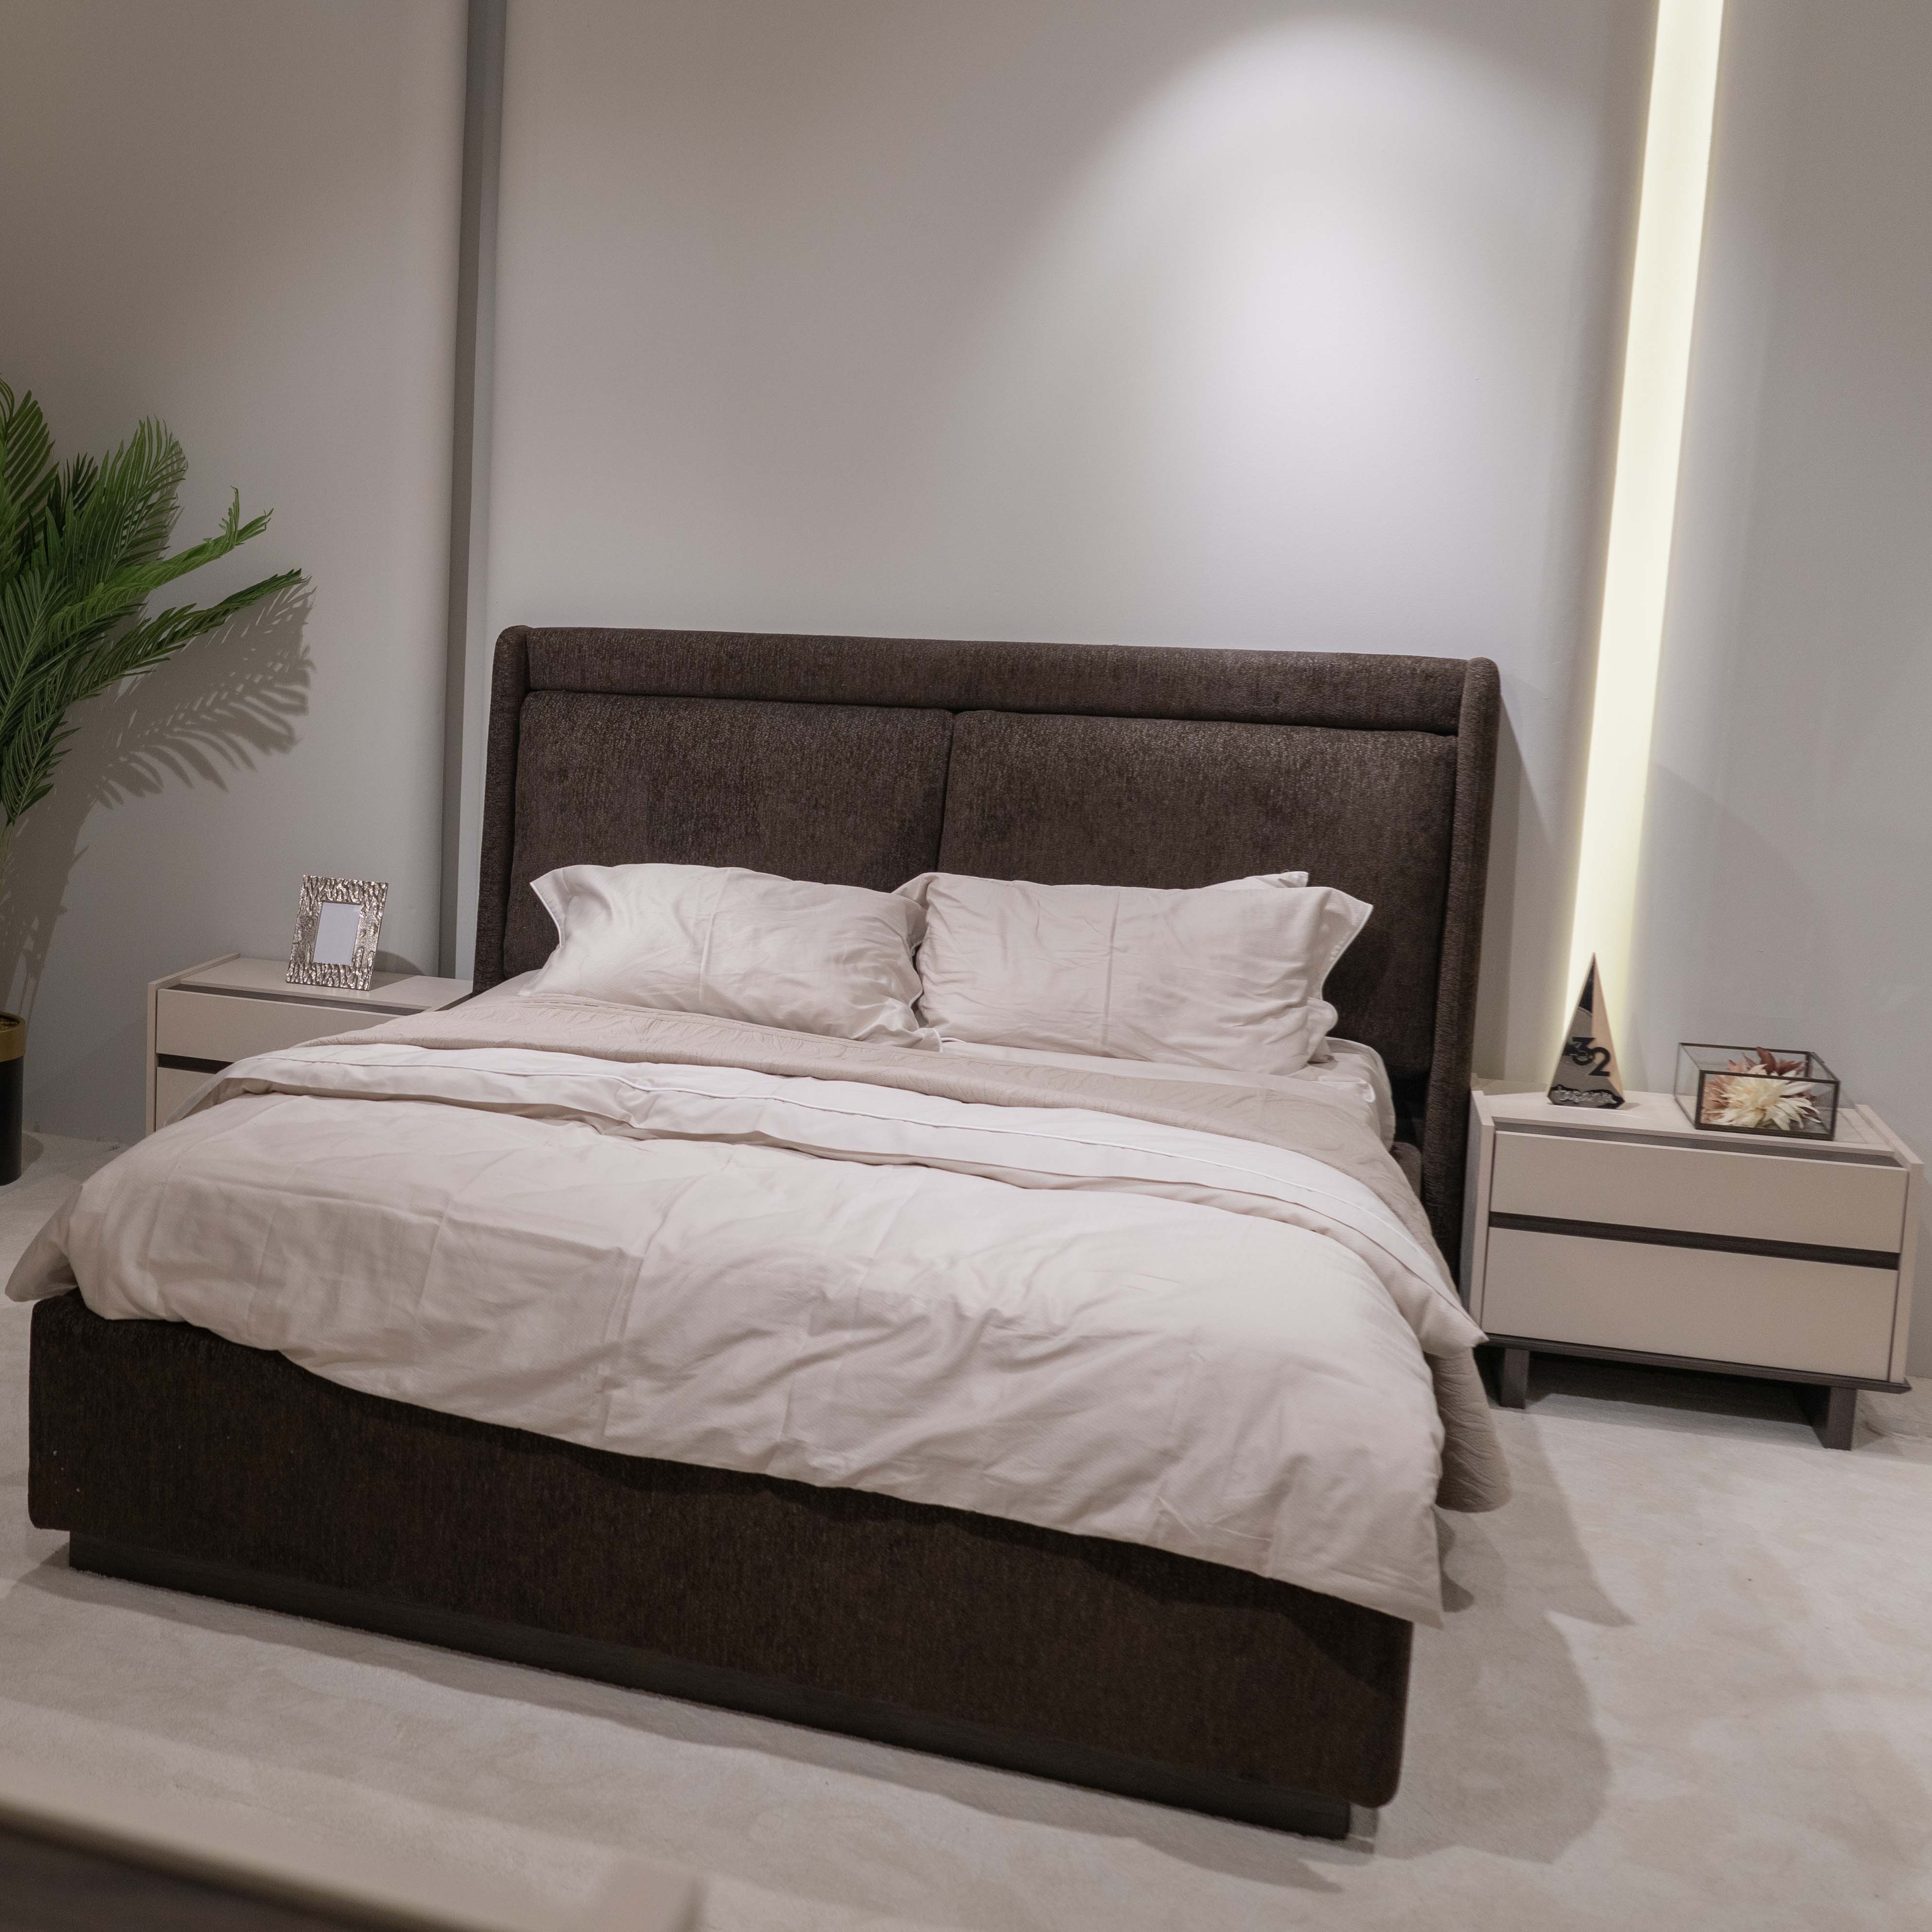 Bella Bed Without Storage 160x200 cm